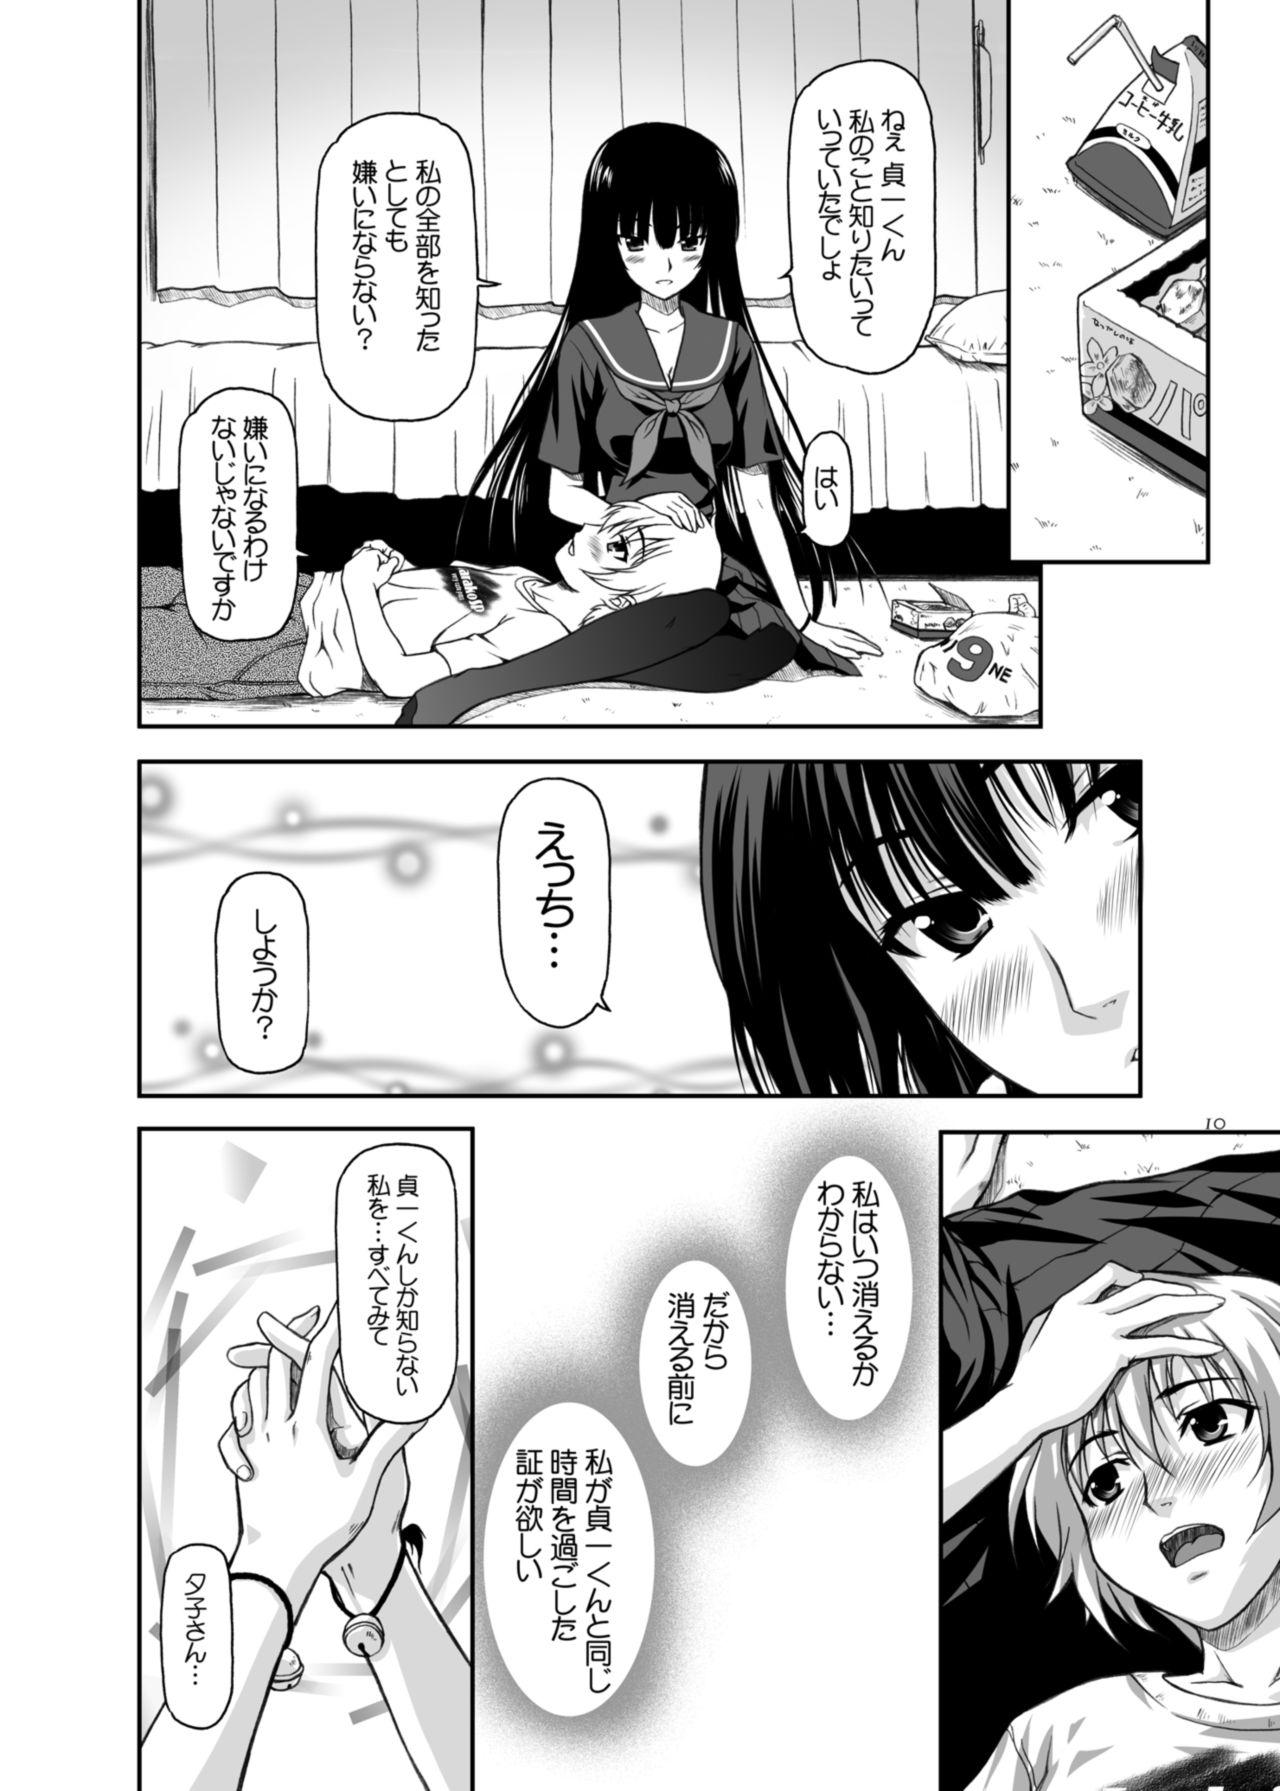 Groupfuck Disappearance Maiden - Tasogare otome x amnesia Free Real Porn - Page 8